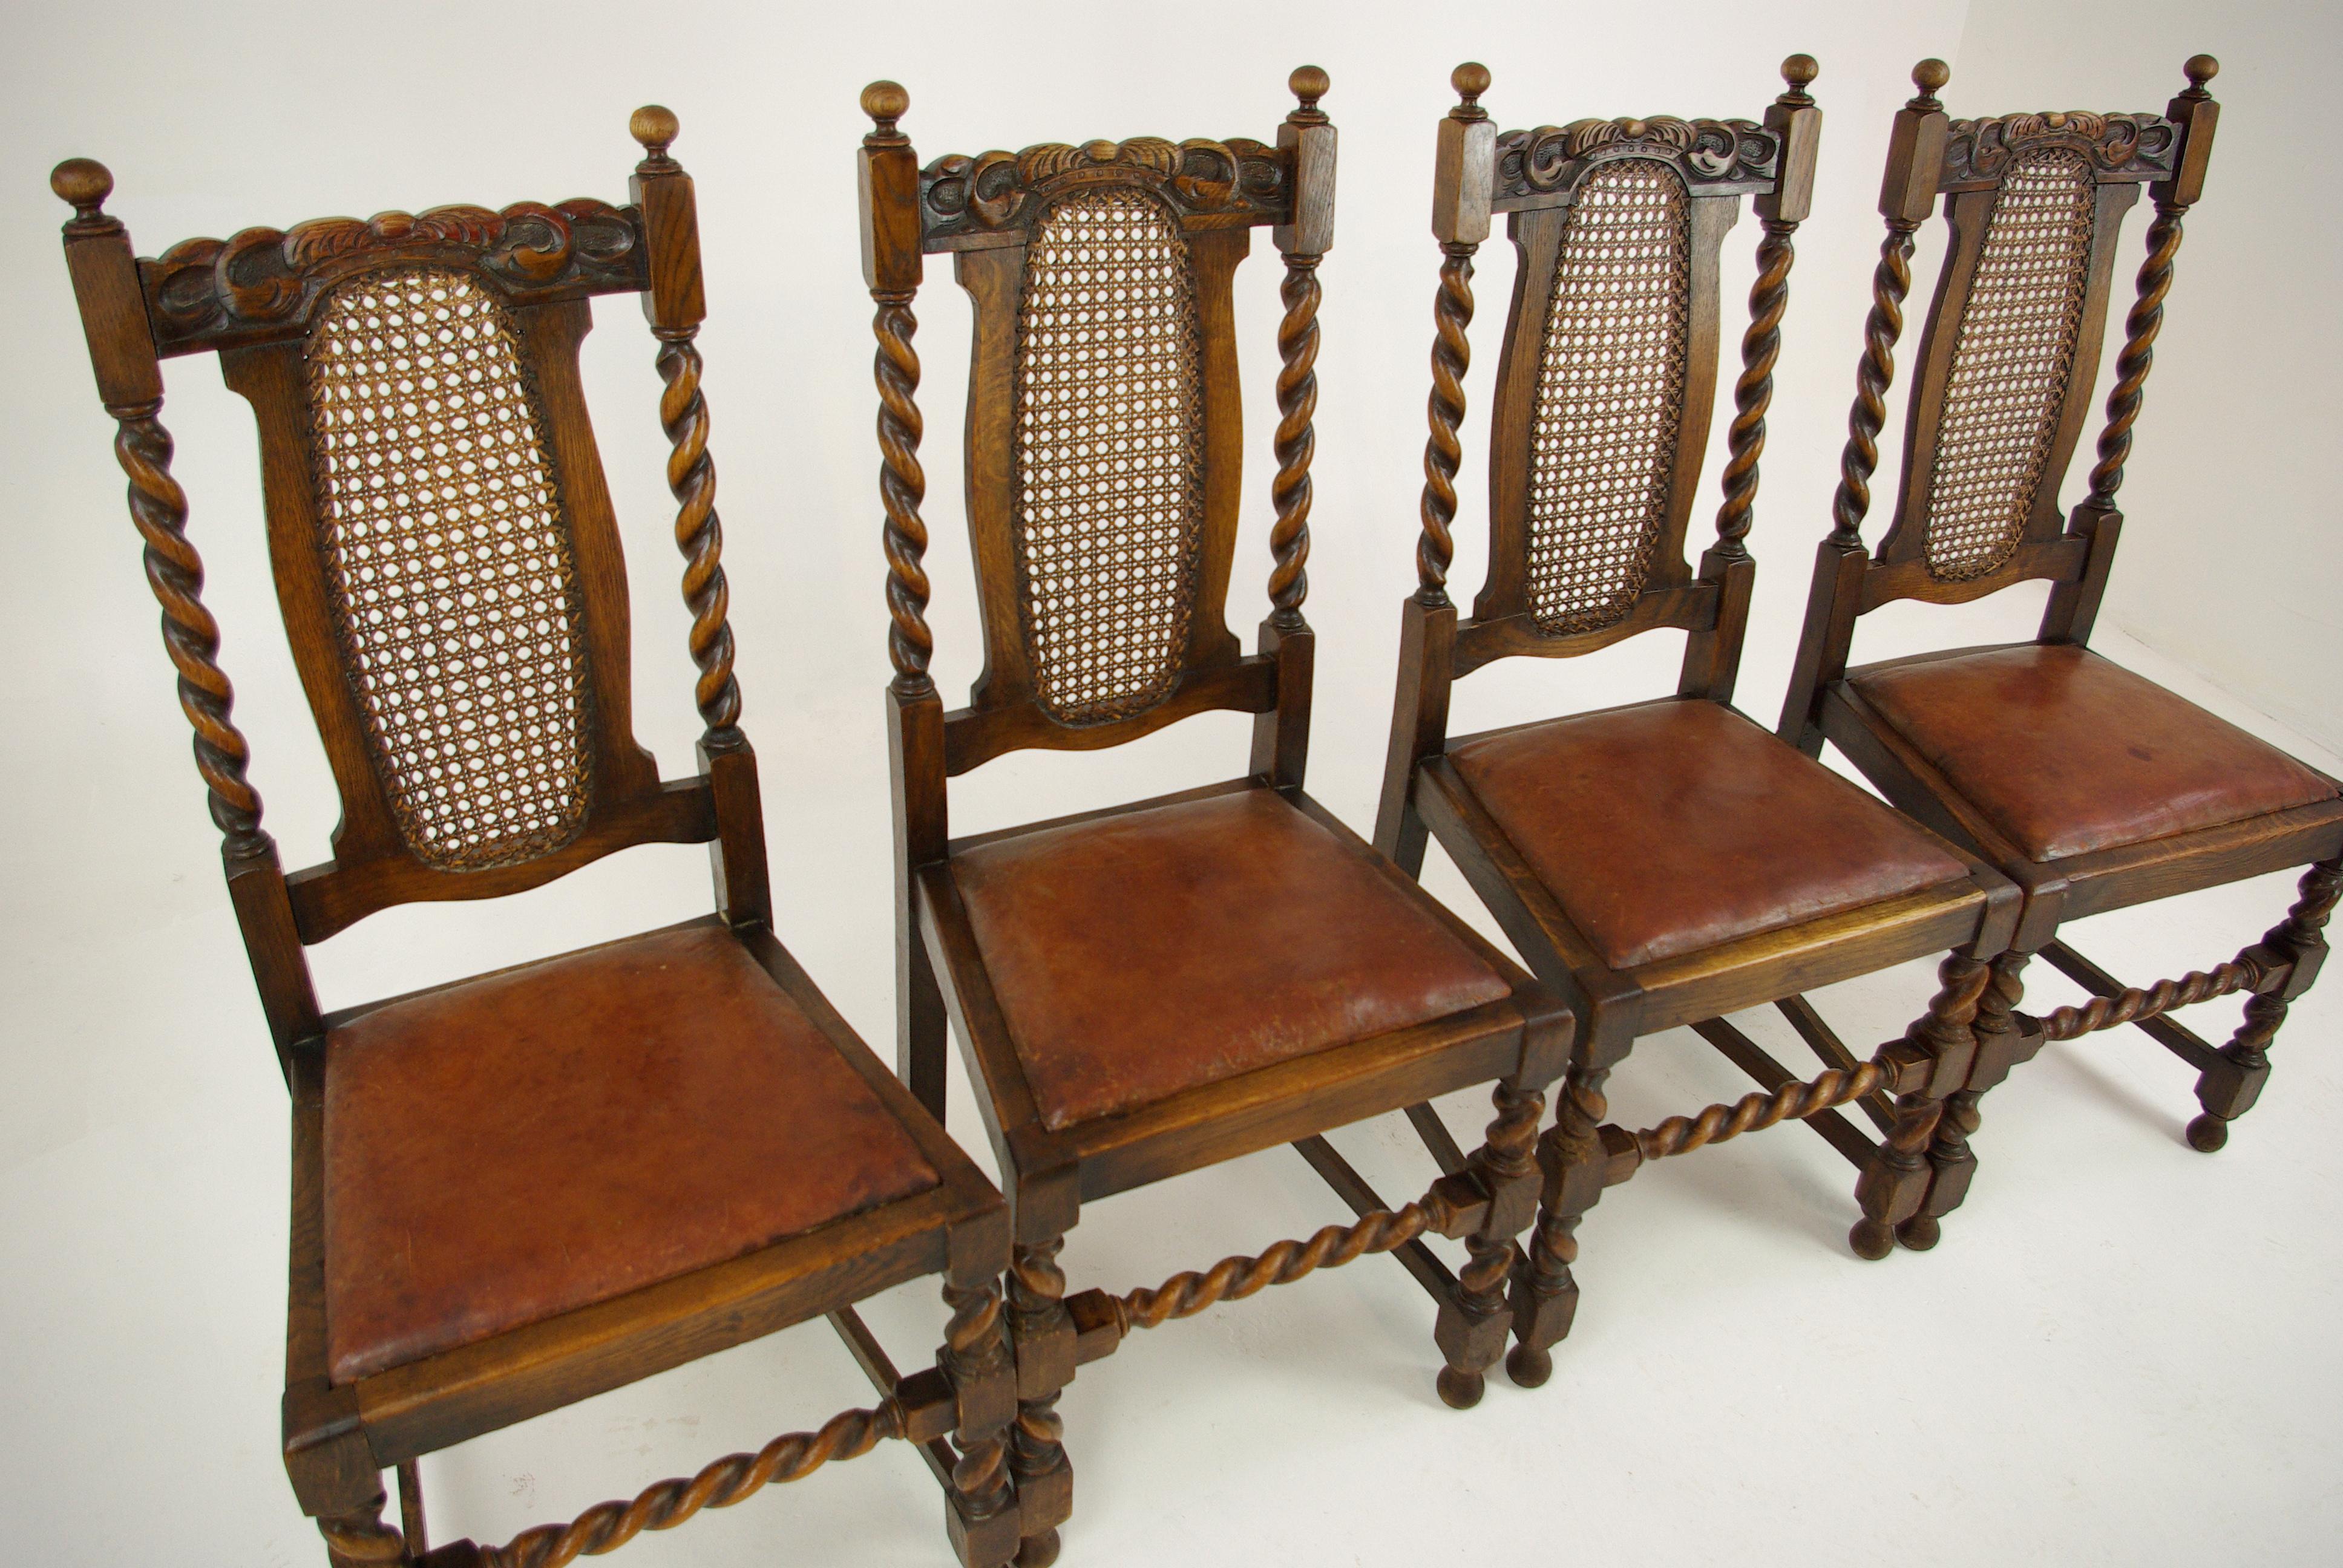 4 Antique dining chairs, barley twist chairs, oak dining chairs, Scotland 1920, B1438

Scotland 1920
Solid oak construction
Original finish
Carve and shaped back rail
Original oval bergere can panels in excellent condition
Barley twist